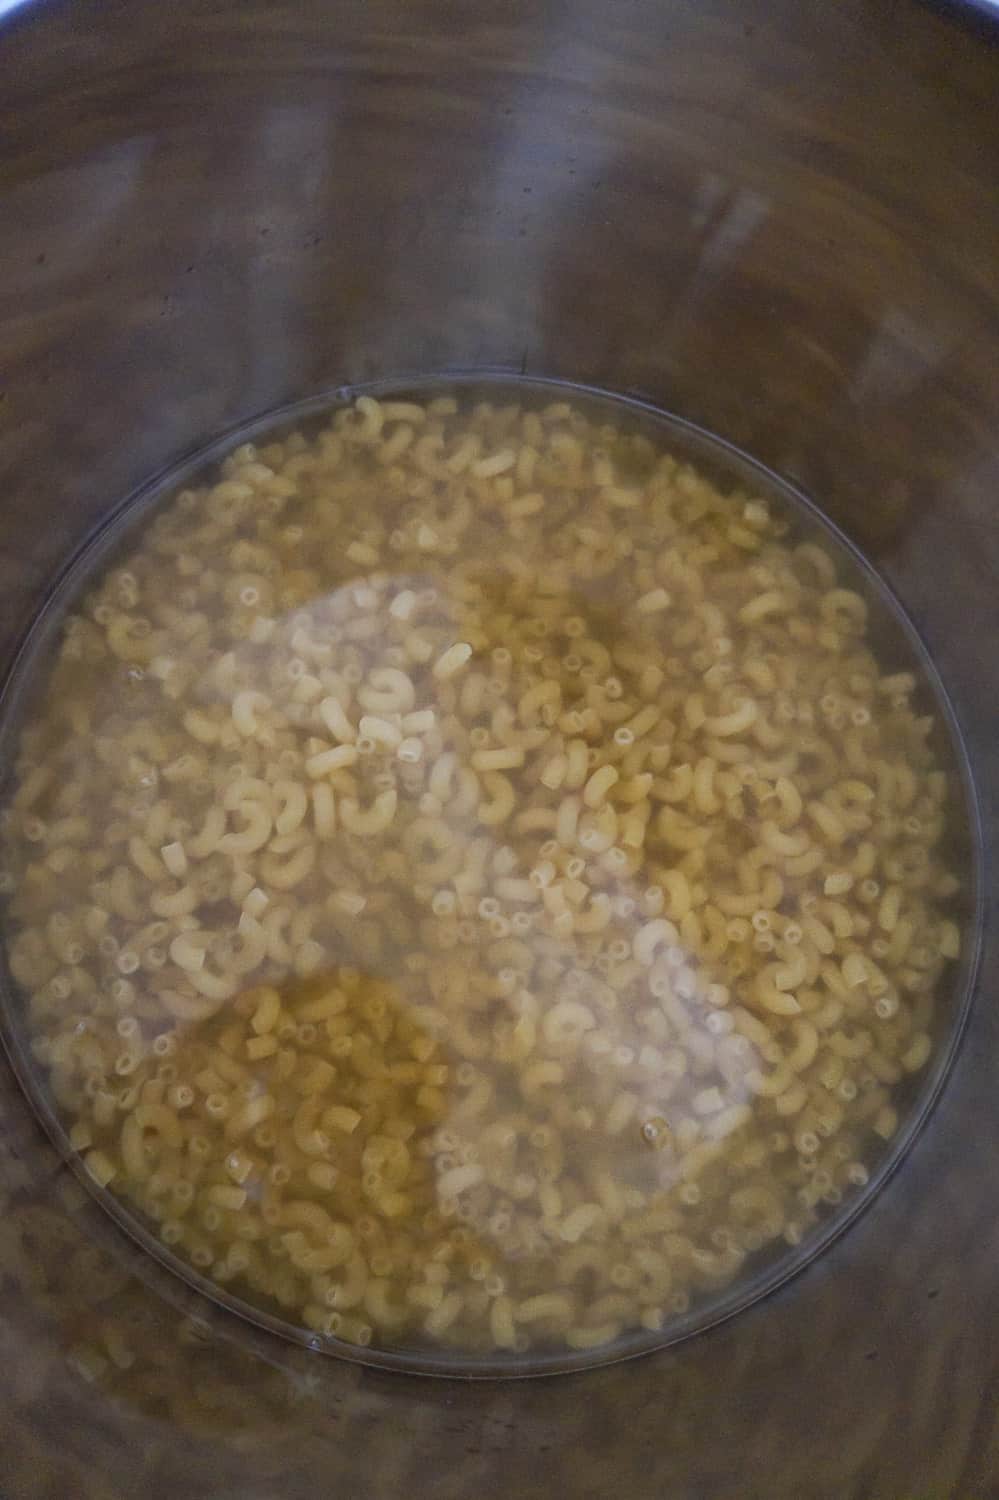 uncooked macaroni submerged in liquid in an Instant Pot